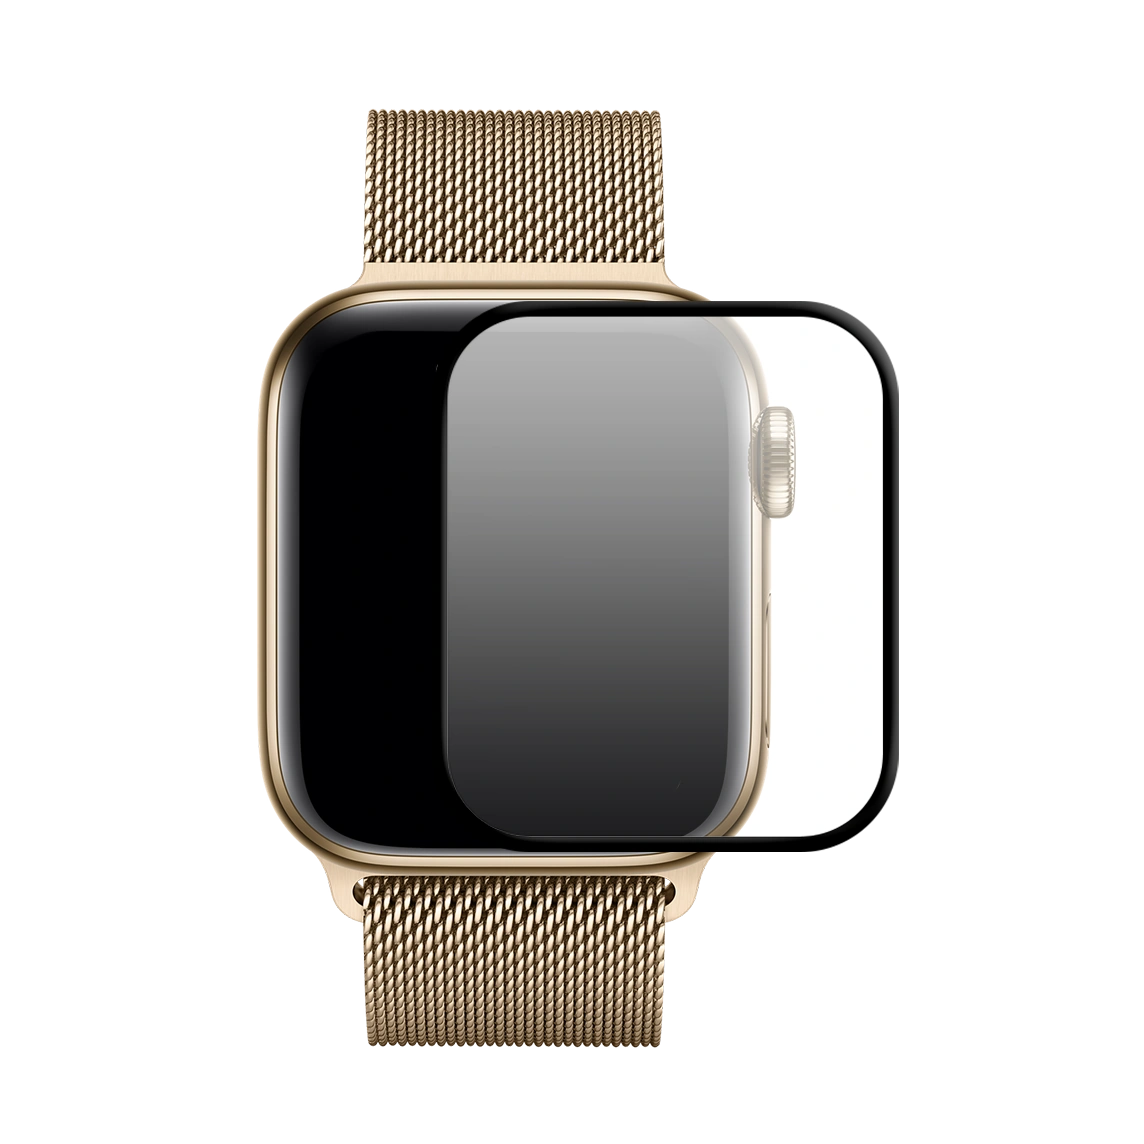 Apple Watch Series 7 Graphite Stainless Steel Case with Milanese Loop